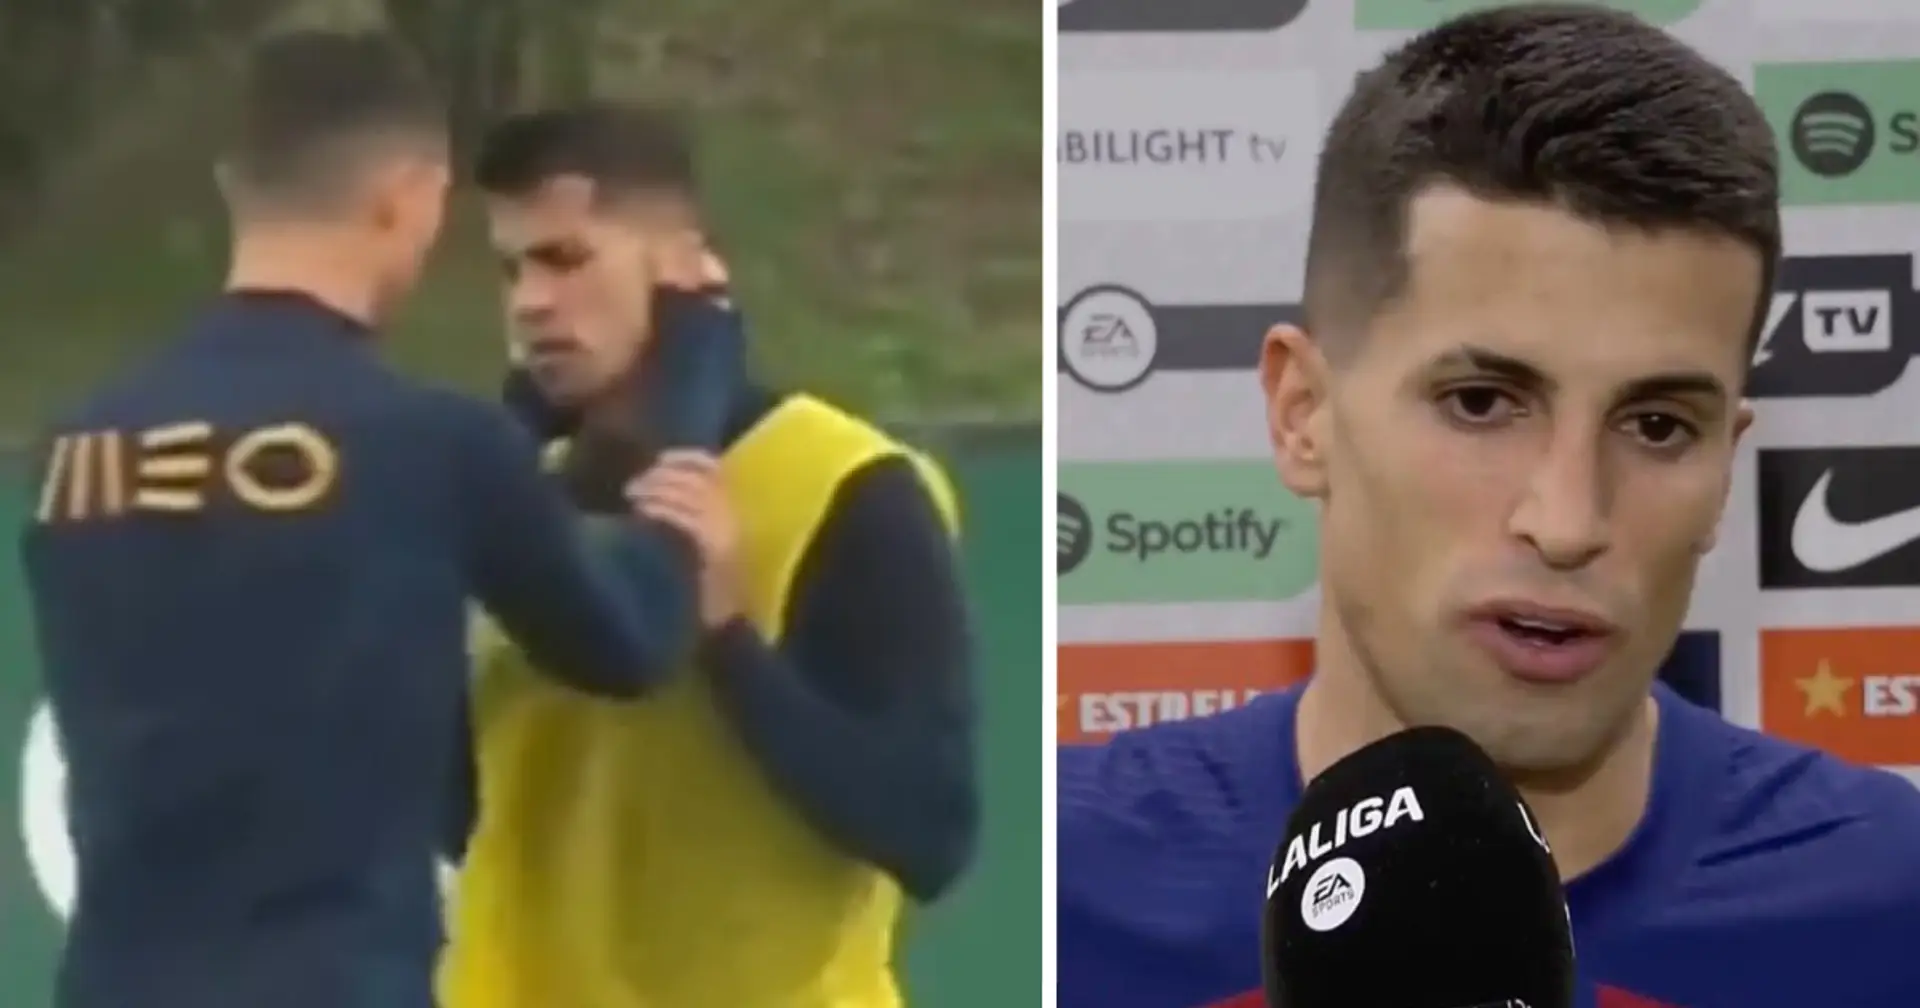 Portugal legend tried convincing Cancelo to join Real Madrid, his response is pure Blaugrana